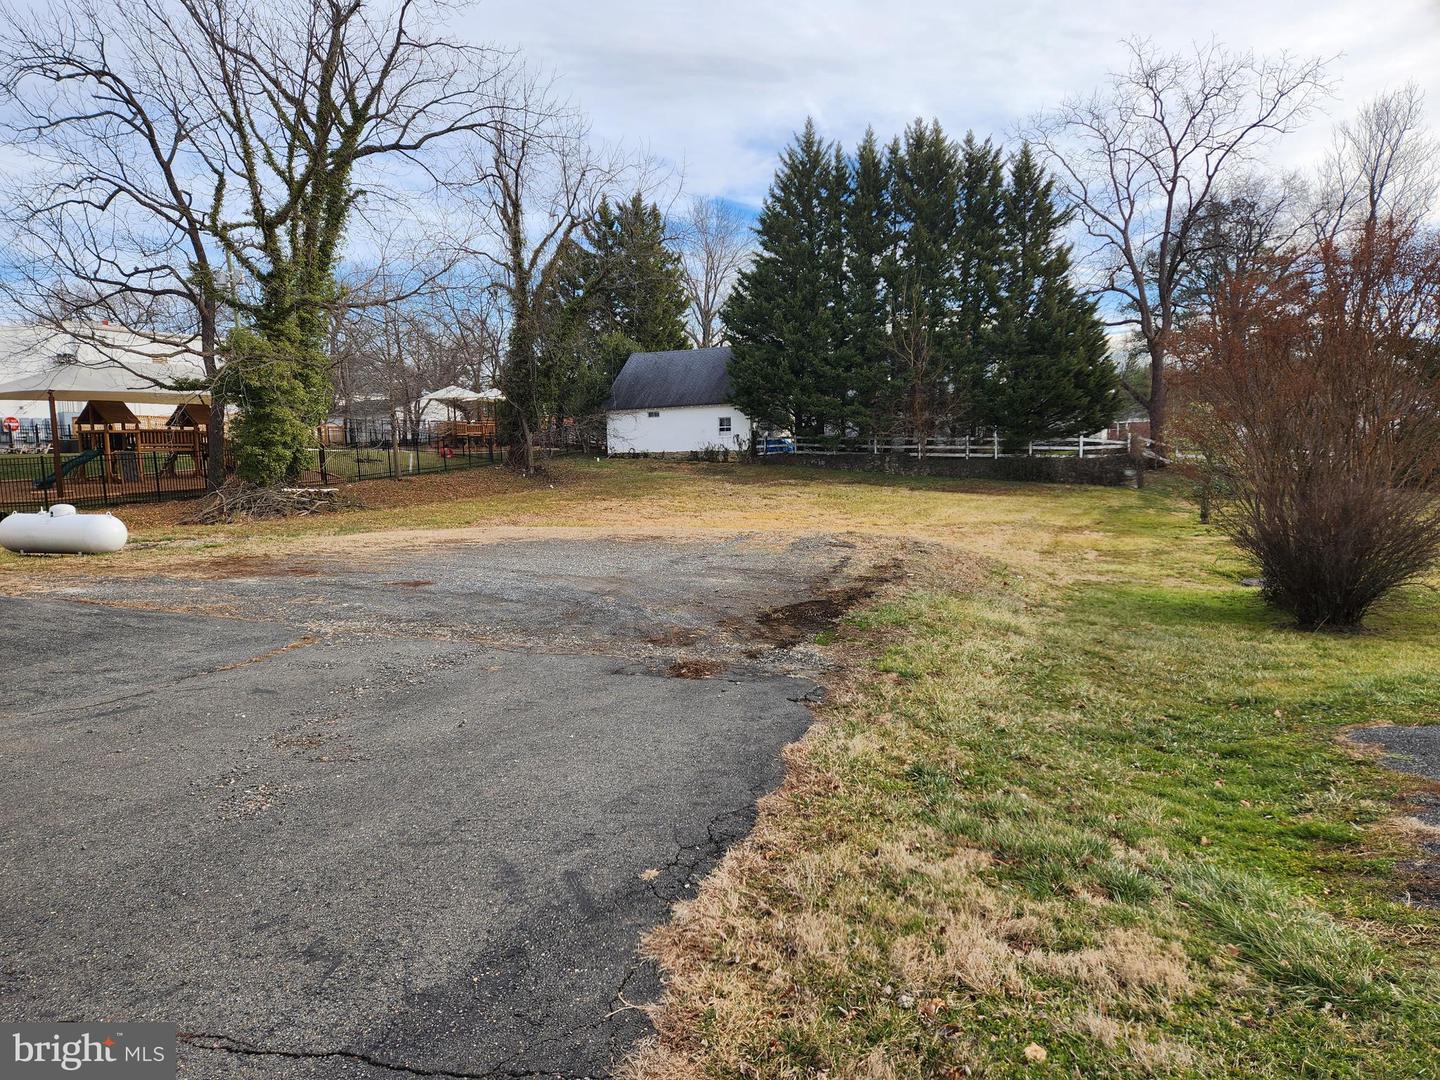 140 S 20TH ST, PURCELLVILLE, Virginia 20132, ,Land,For sale,140 S 20TH ST,VALO2017240 MLS # VALO2017240